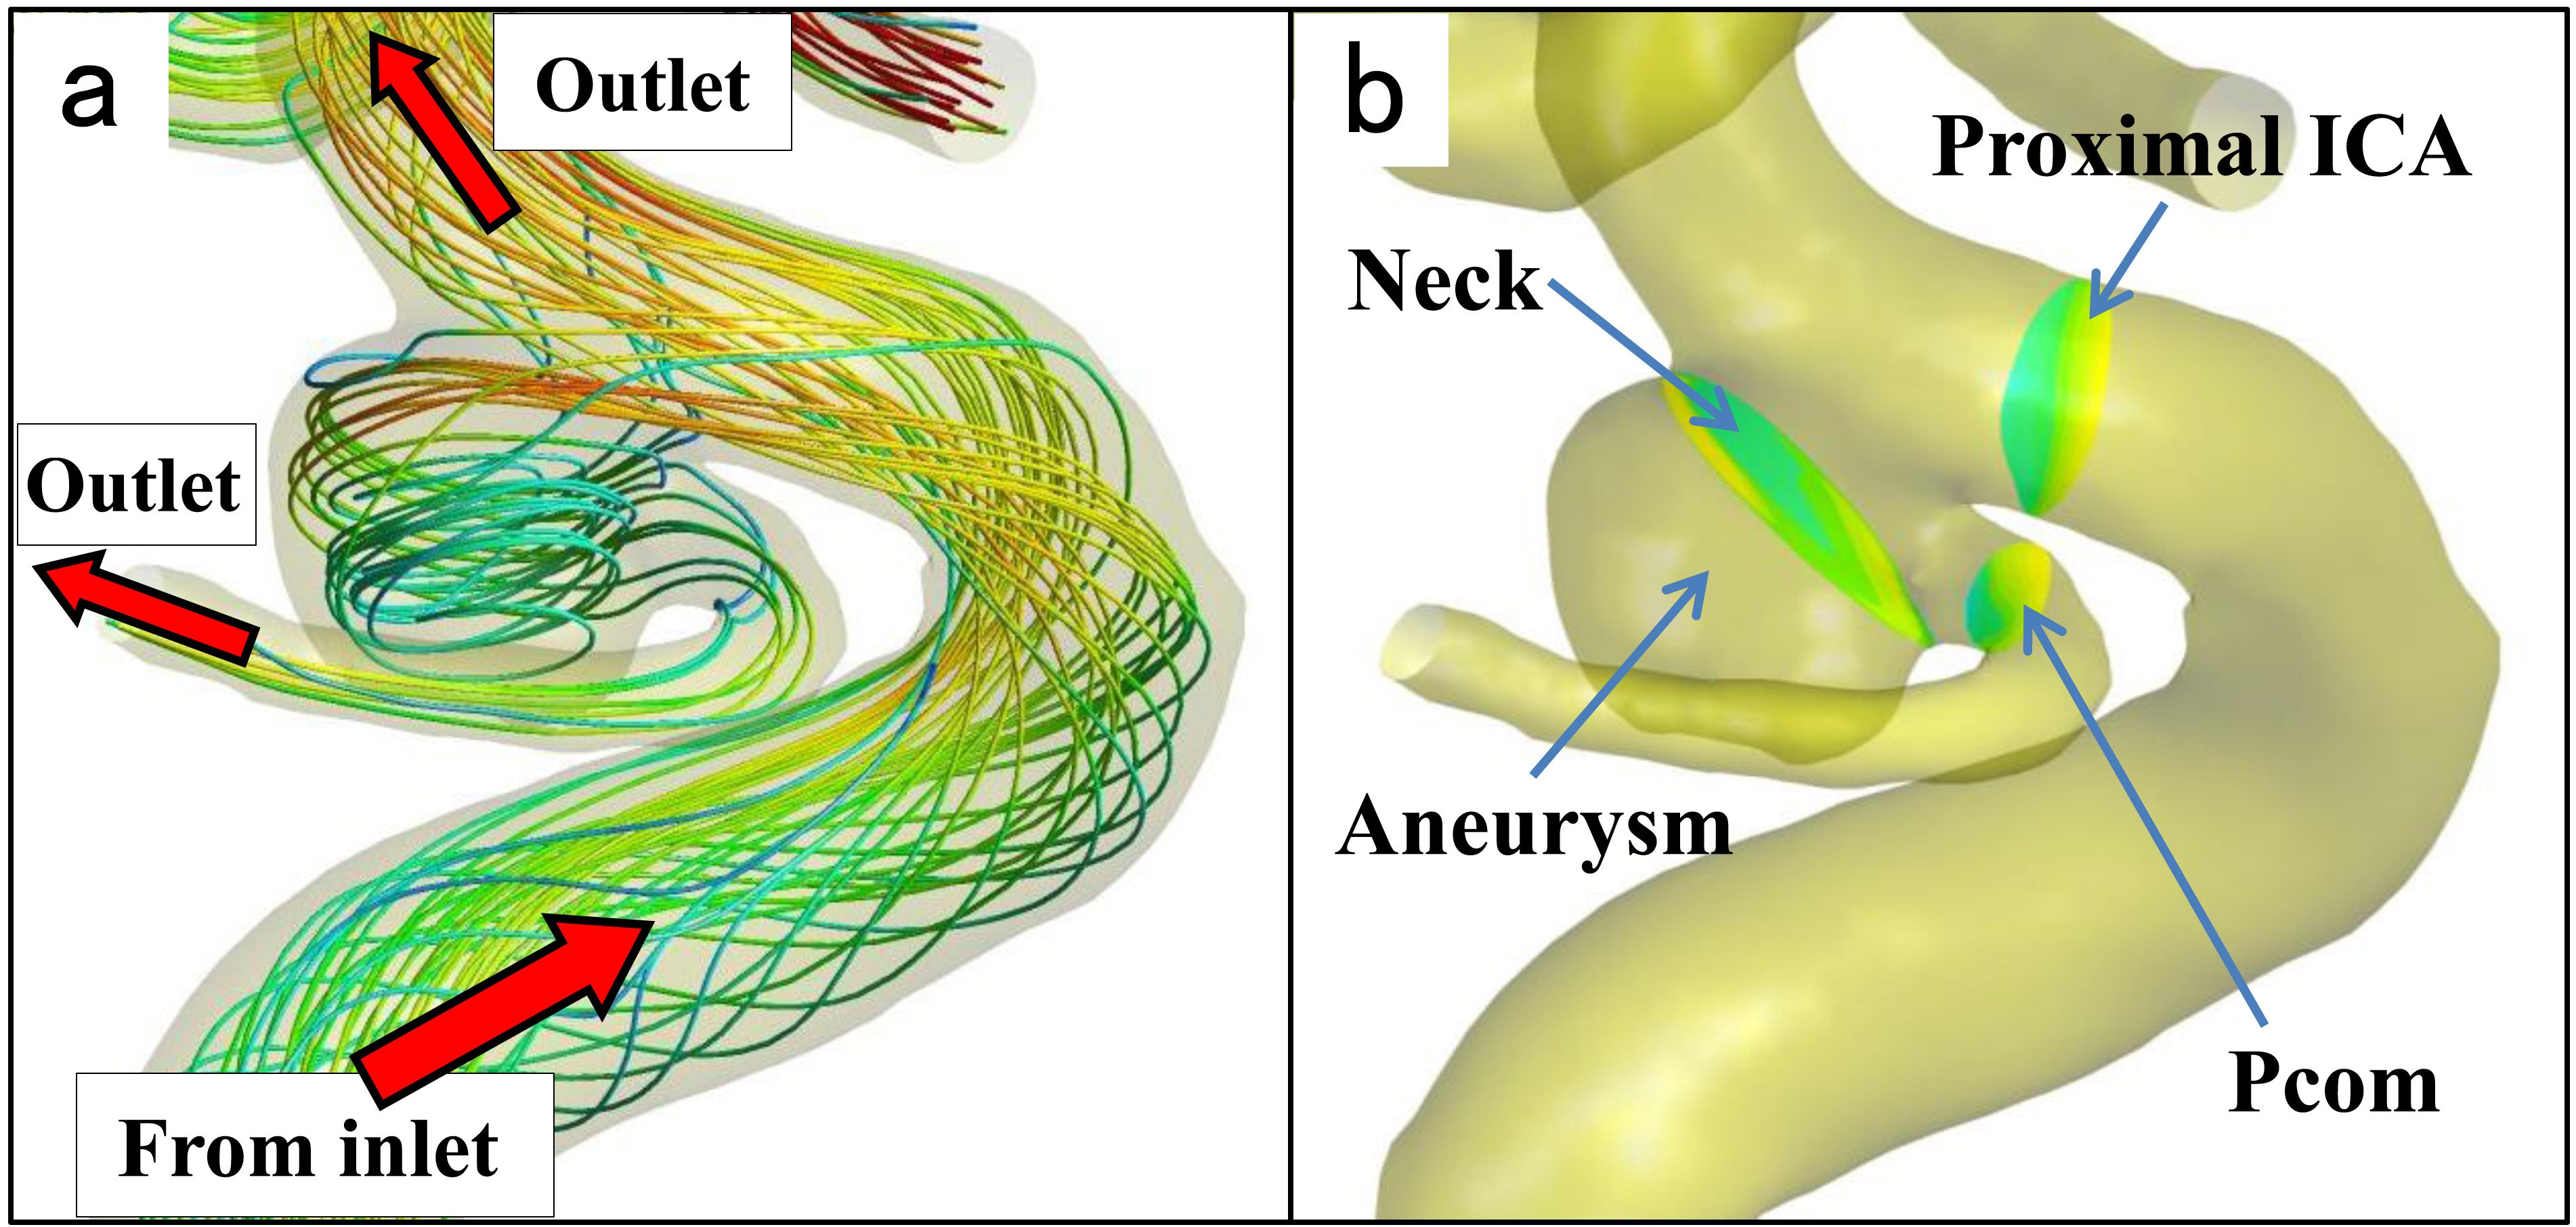 Definition of vascular model. (a): The vascular and aneurysm model with streamlines showing a spatial relationship between inlet and outlets. The streamlines from the inlet, at the proximal site of the internal carotid artery (ICA), run to both the aneurysm and distal site of the ICA, which finally flow into outlet vessels, including the posterior communicating artery (Pcom). (b): The neck plane is defined as just distal to the Pcom bifurcation. The proximal ICA and Pcom planes are defined as 1 mm from the aneurysm.